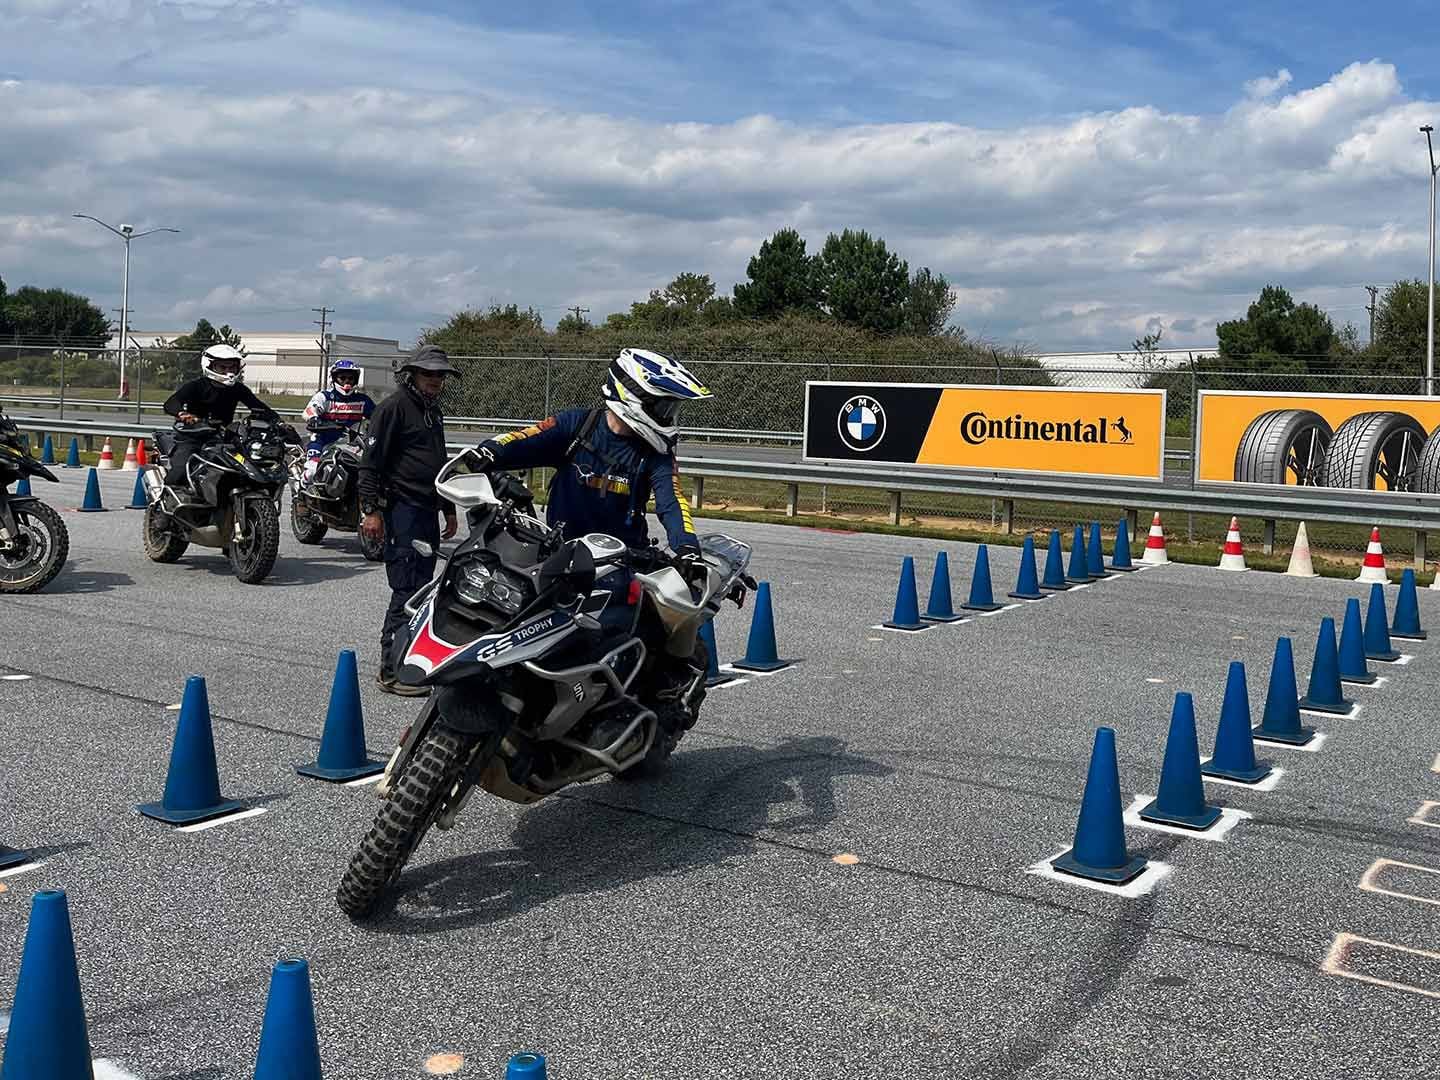 Doing police-rodeo-style cone courses will be part of Trophy Qualifying. Here, the author successfully negotiates the “Head and Shoulders” course.